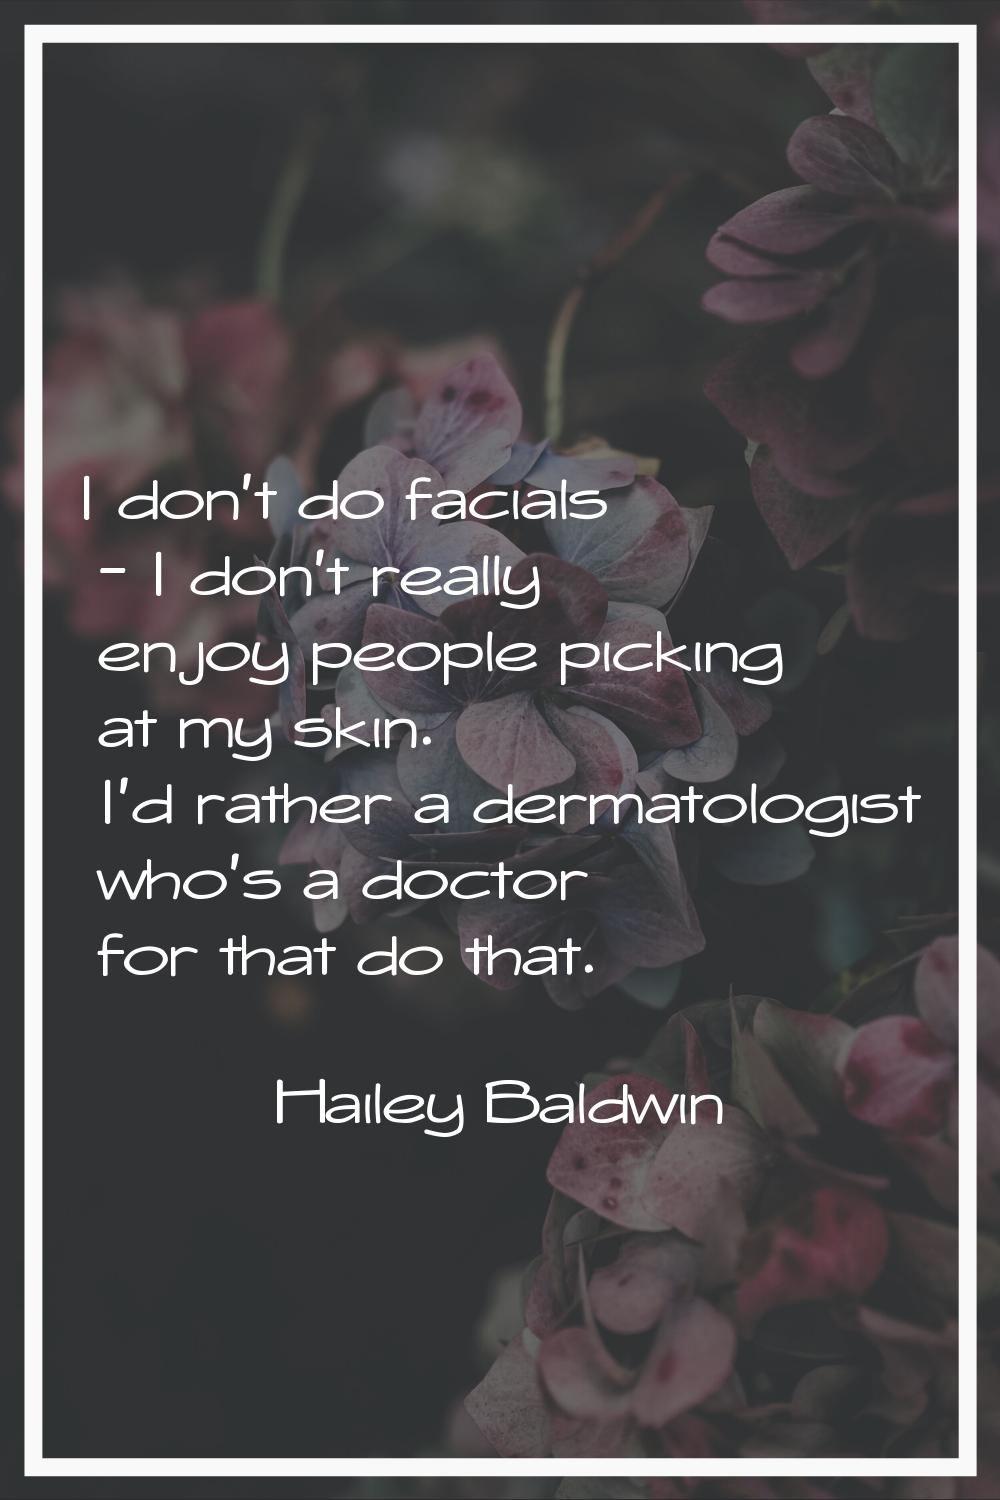 I don't do facials - I don't really enjoy people picking at my skin. I'd rather a dermatologist who